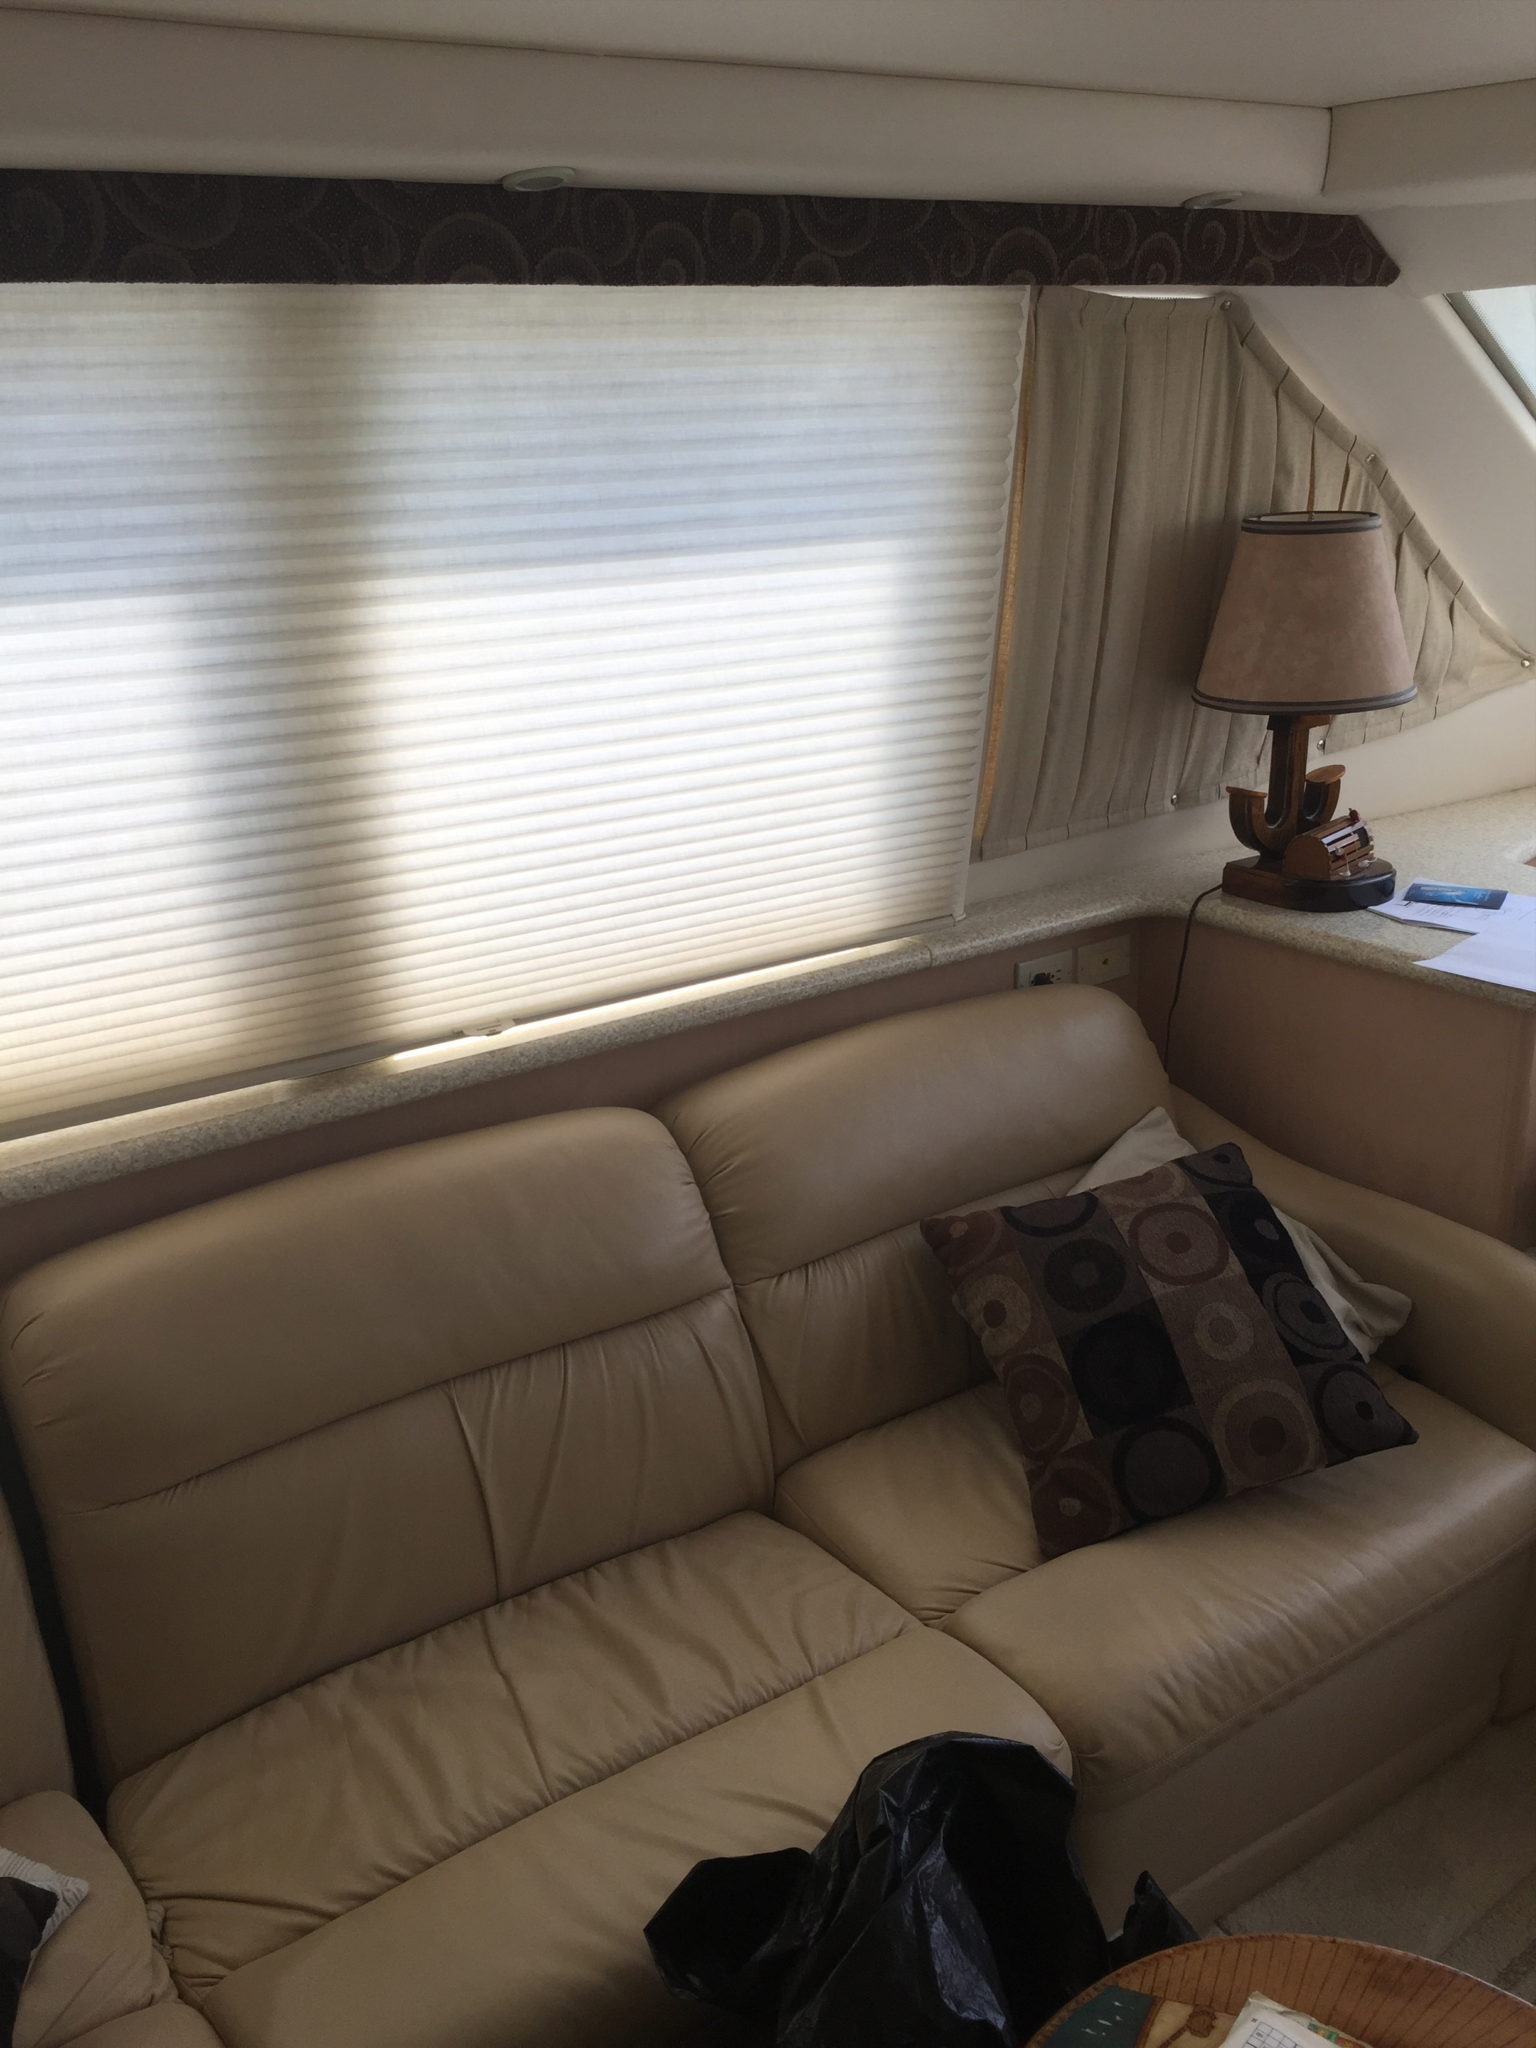 PowerView Motorized Blinds and Shades